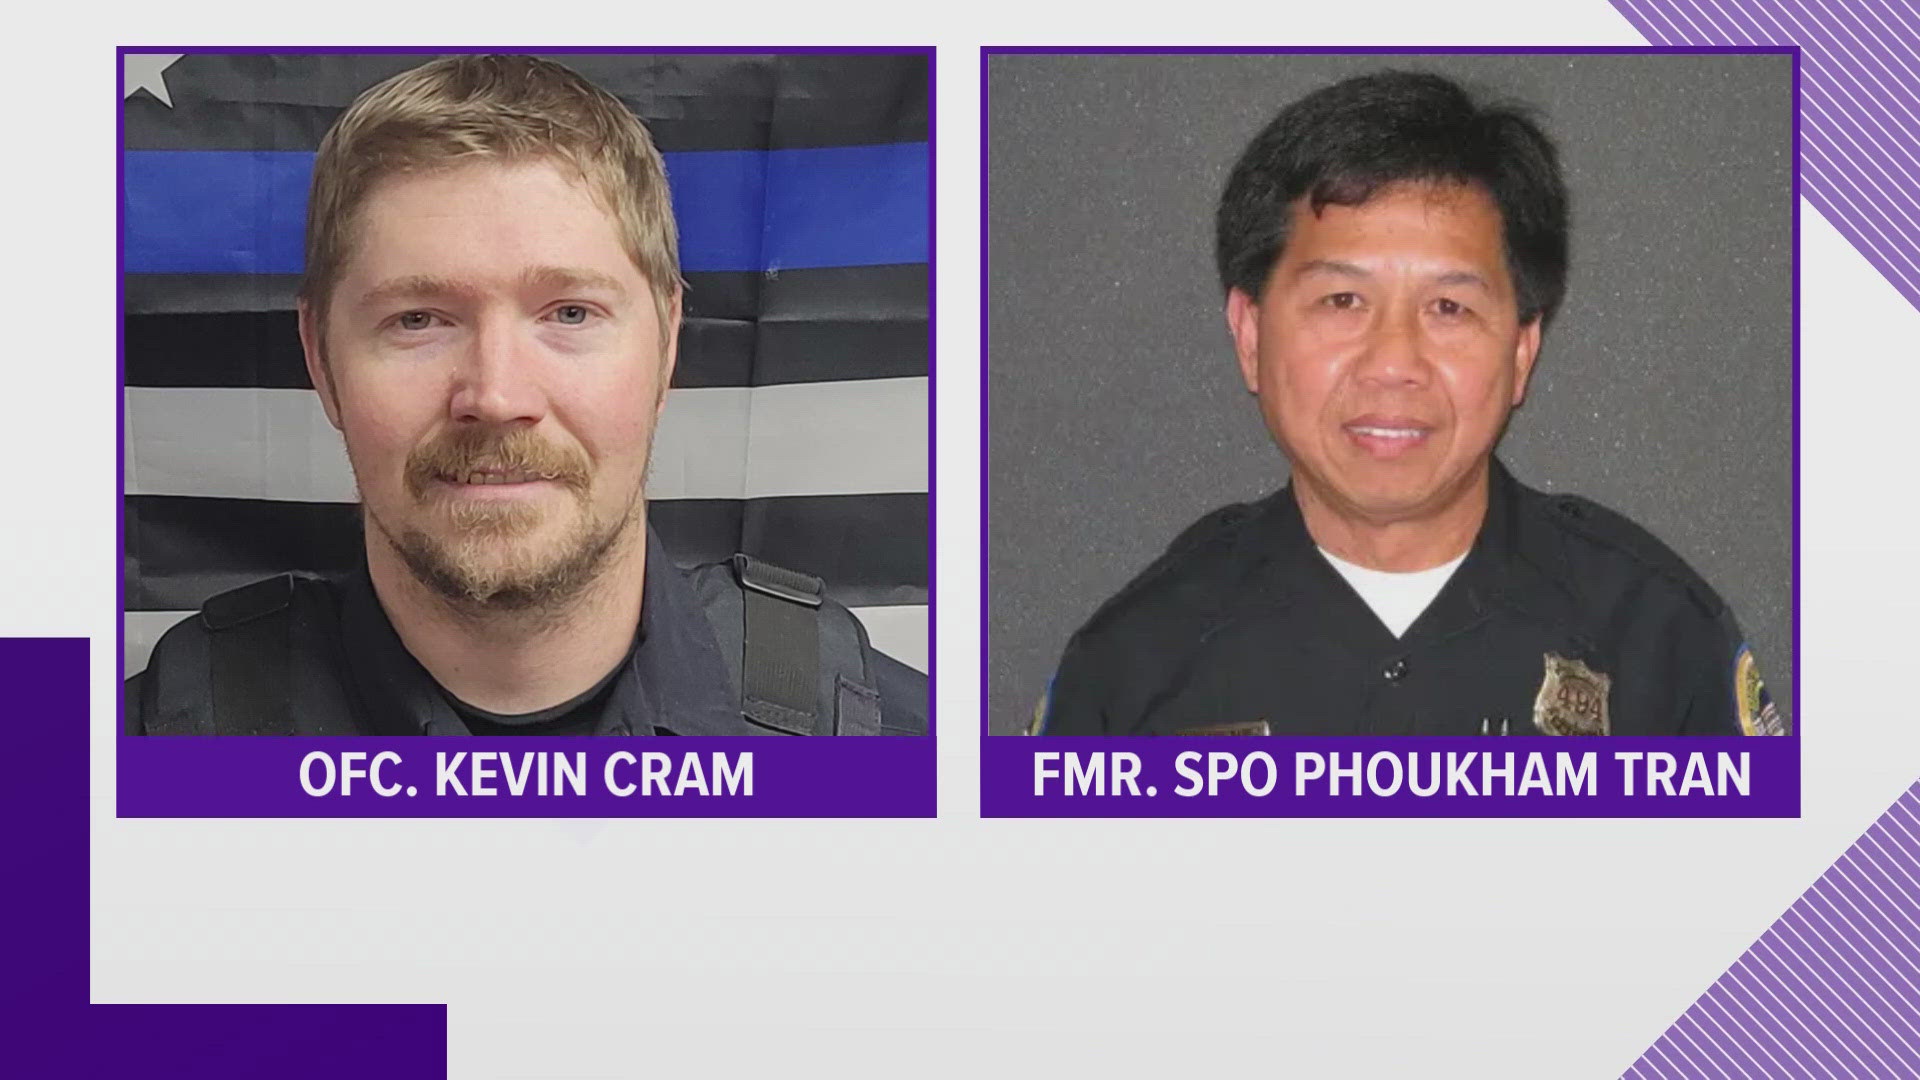 Ofc. Kevin Cram of the Algona Police Department and Ofc. Phoukham Tran of the Des Moines Police Department will both be honored.